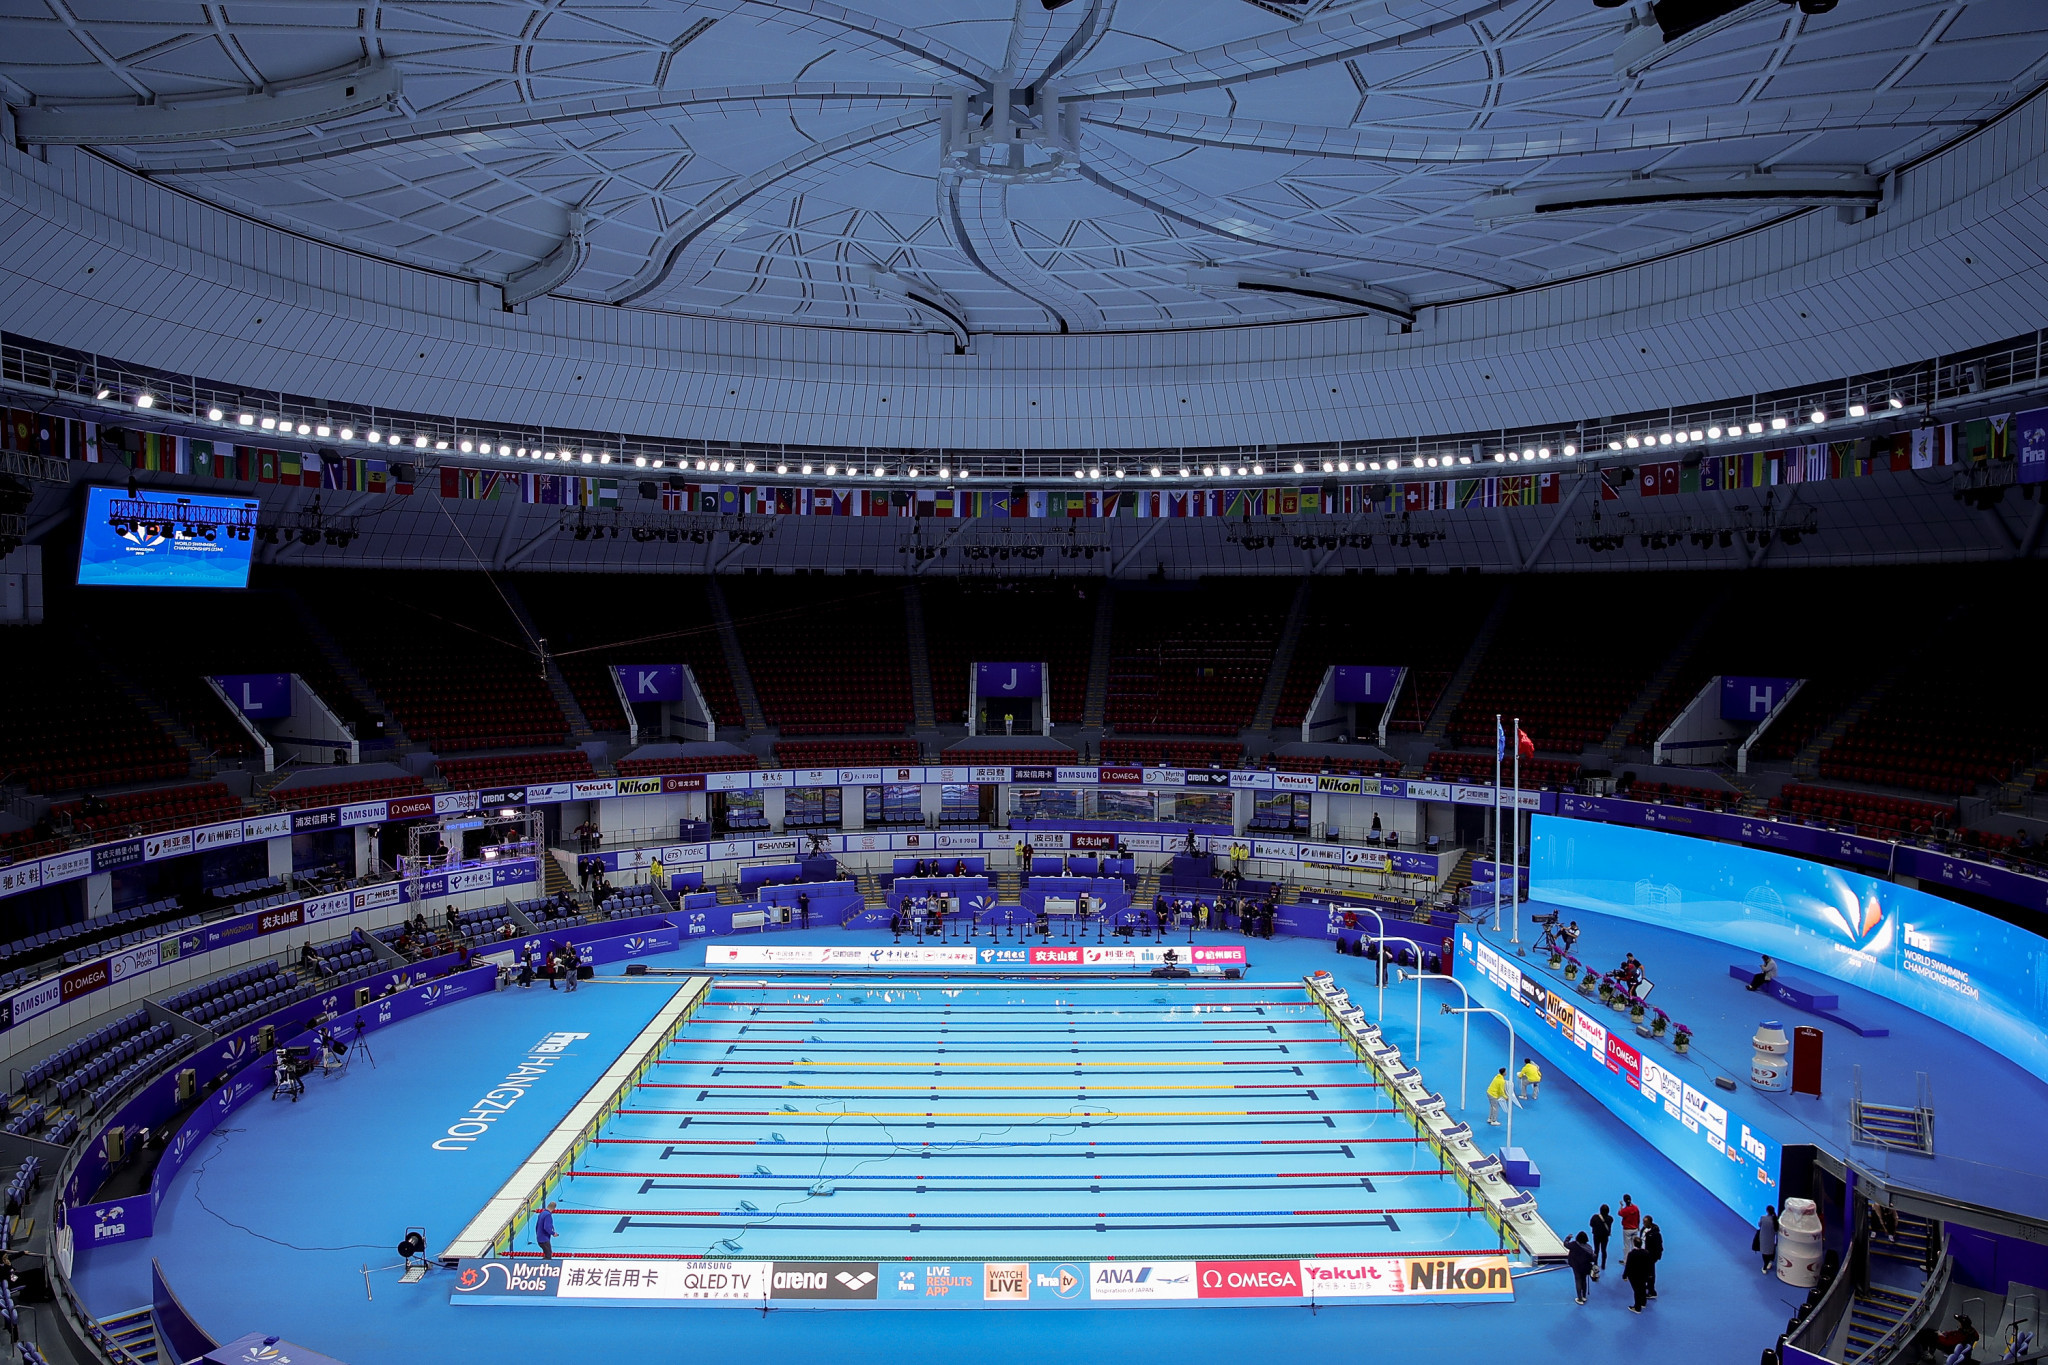 The Hangzhou Olympic Sports Centre opened in December 2018, and staged the FINA World Short Course Swimming Championships in the same month ©Getty Images